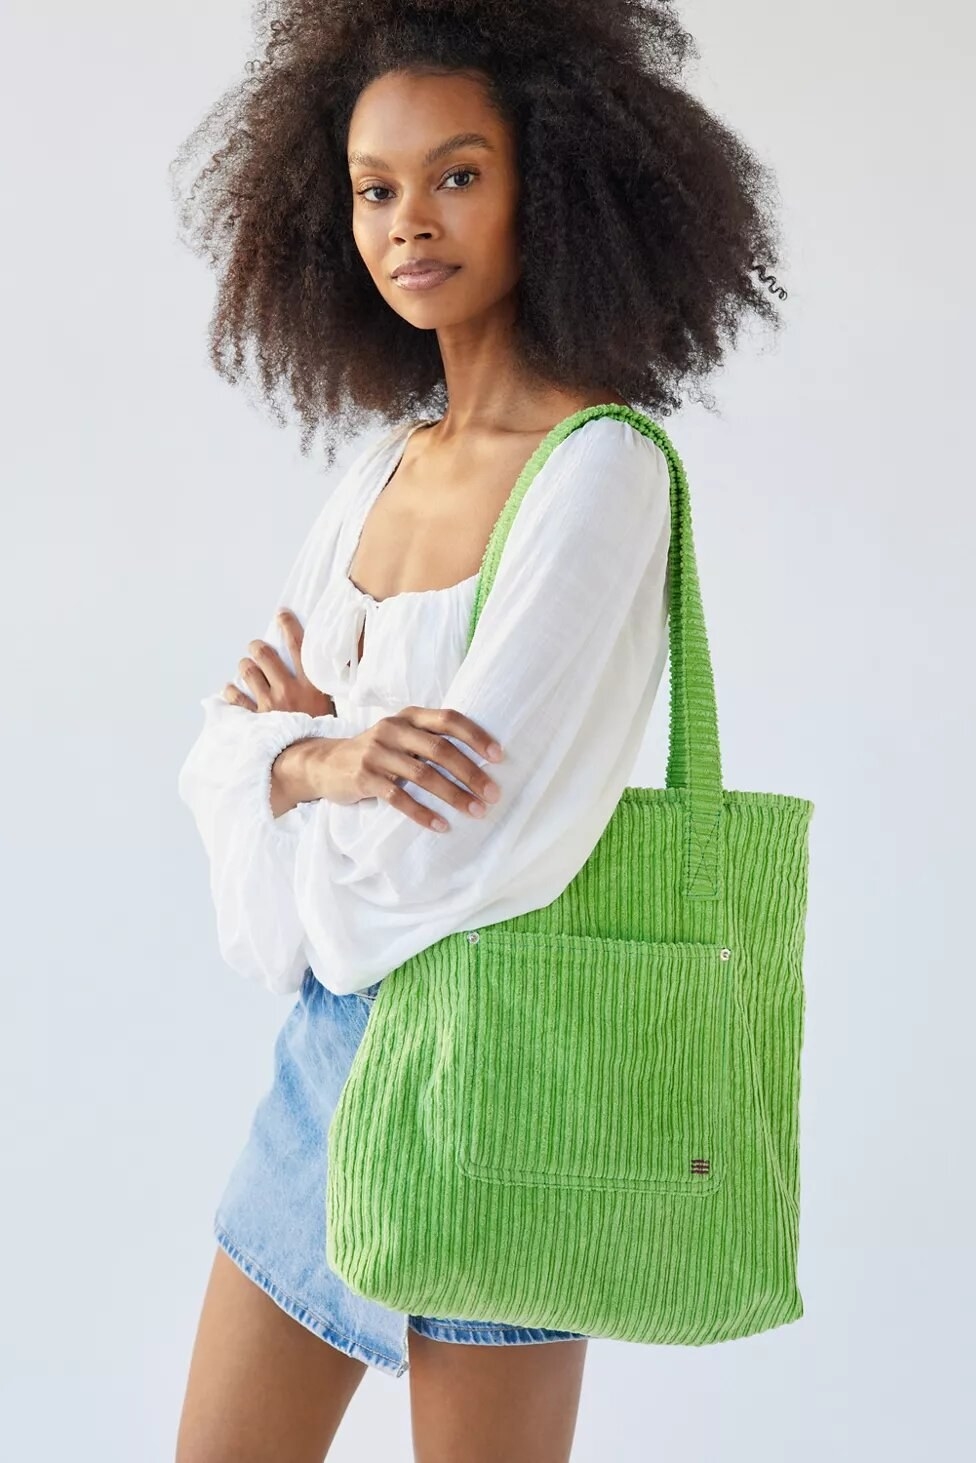 A person carrying the tote bag on their shoulder and posing